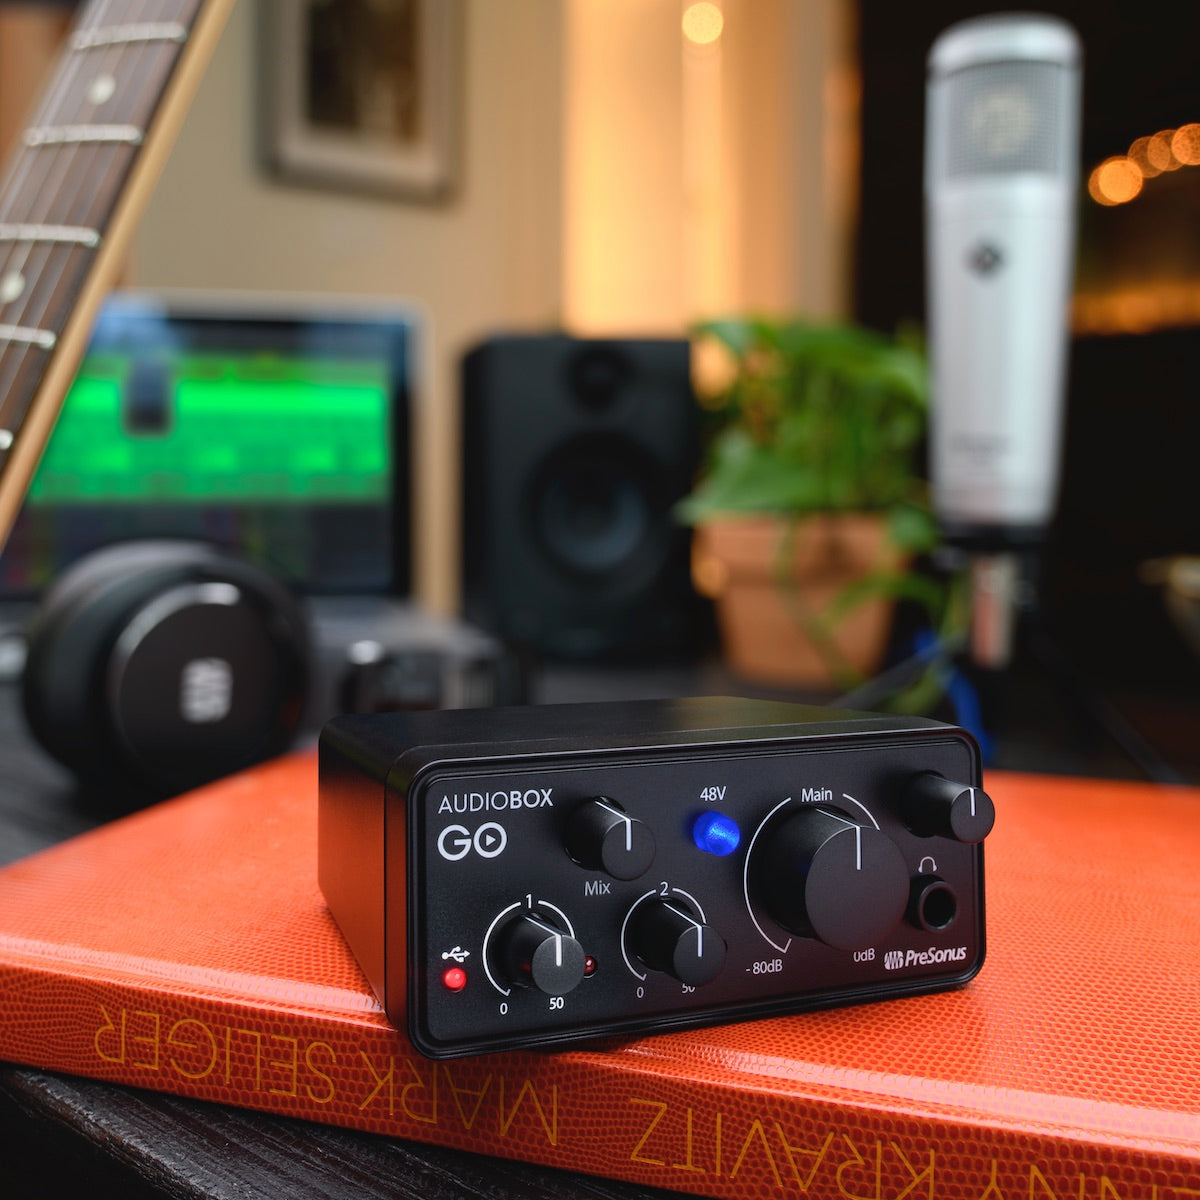 PreSonus AudioBox GO - Ultra-compact Mobile 2x2 USB Audio Interface, shown in a podcast setting